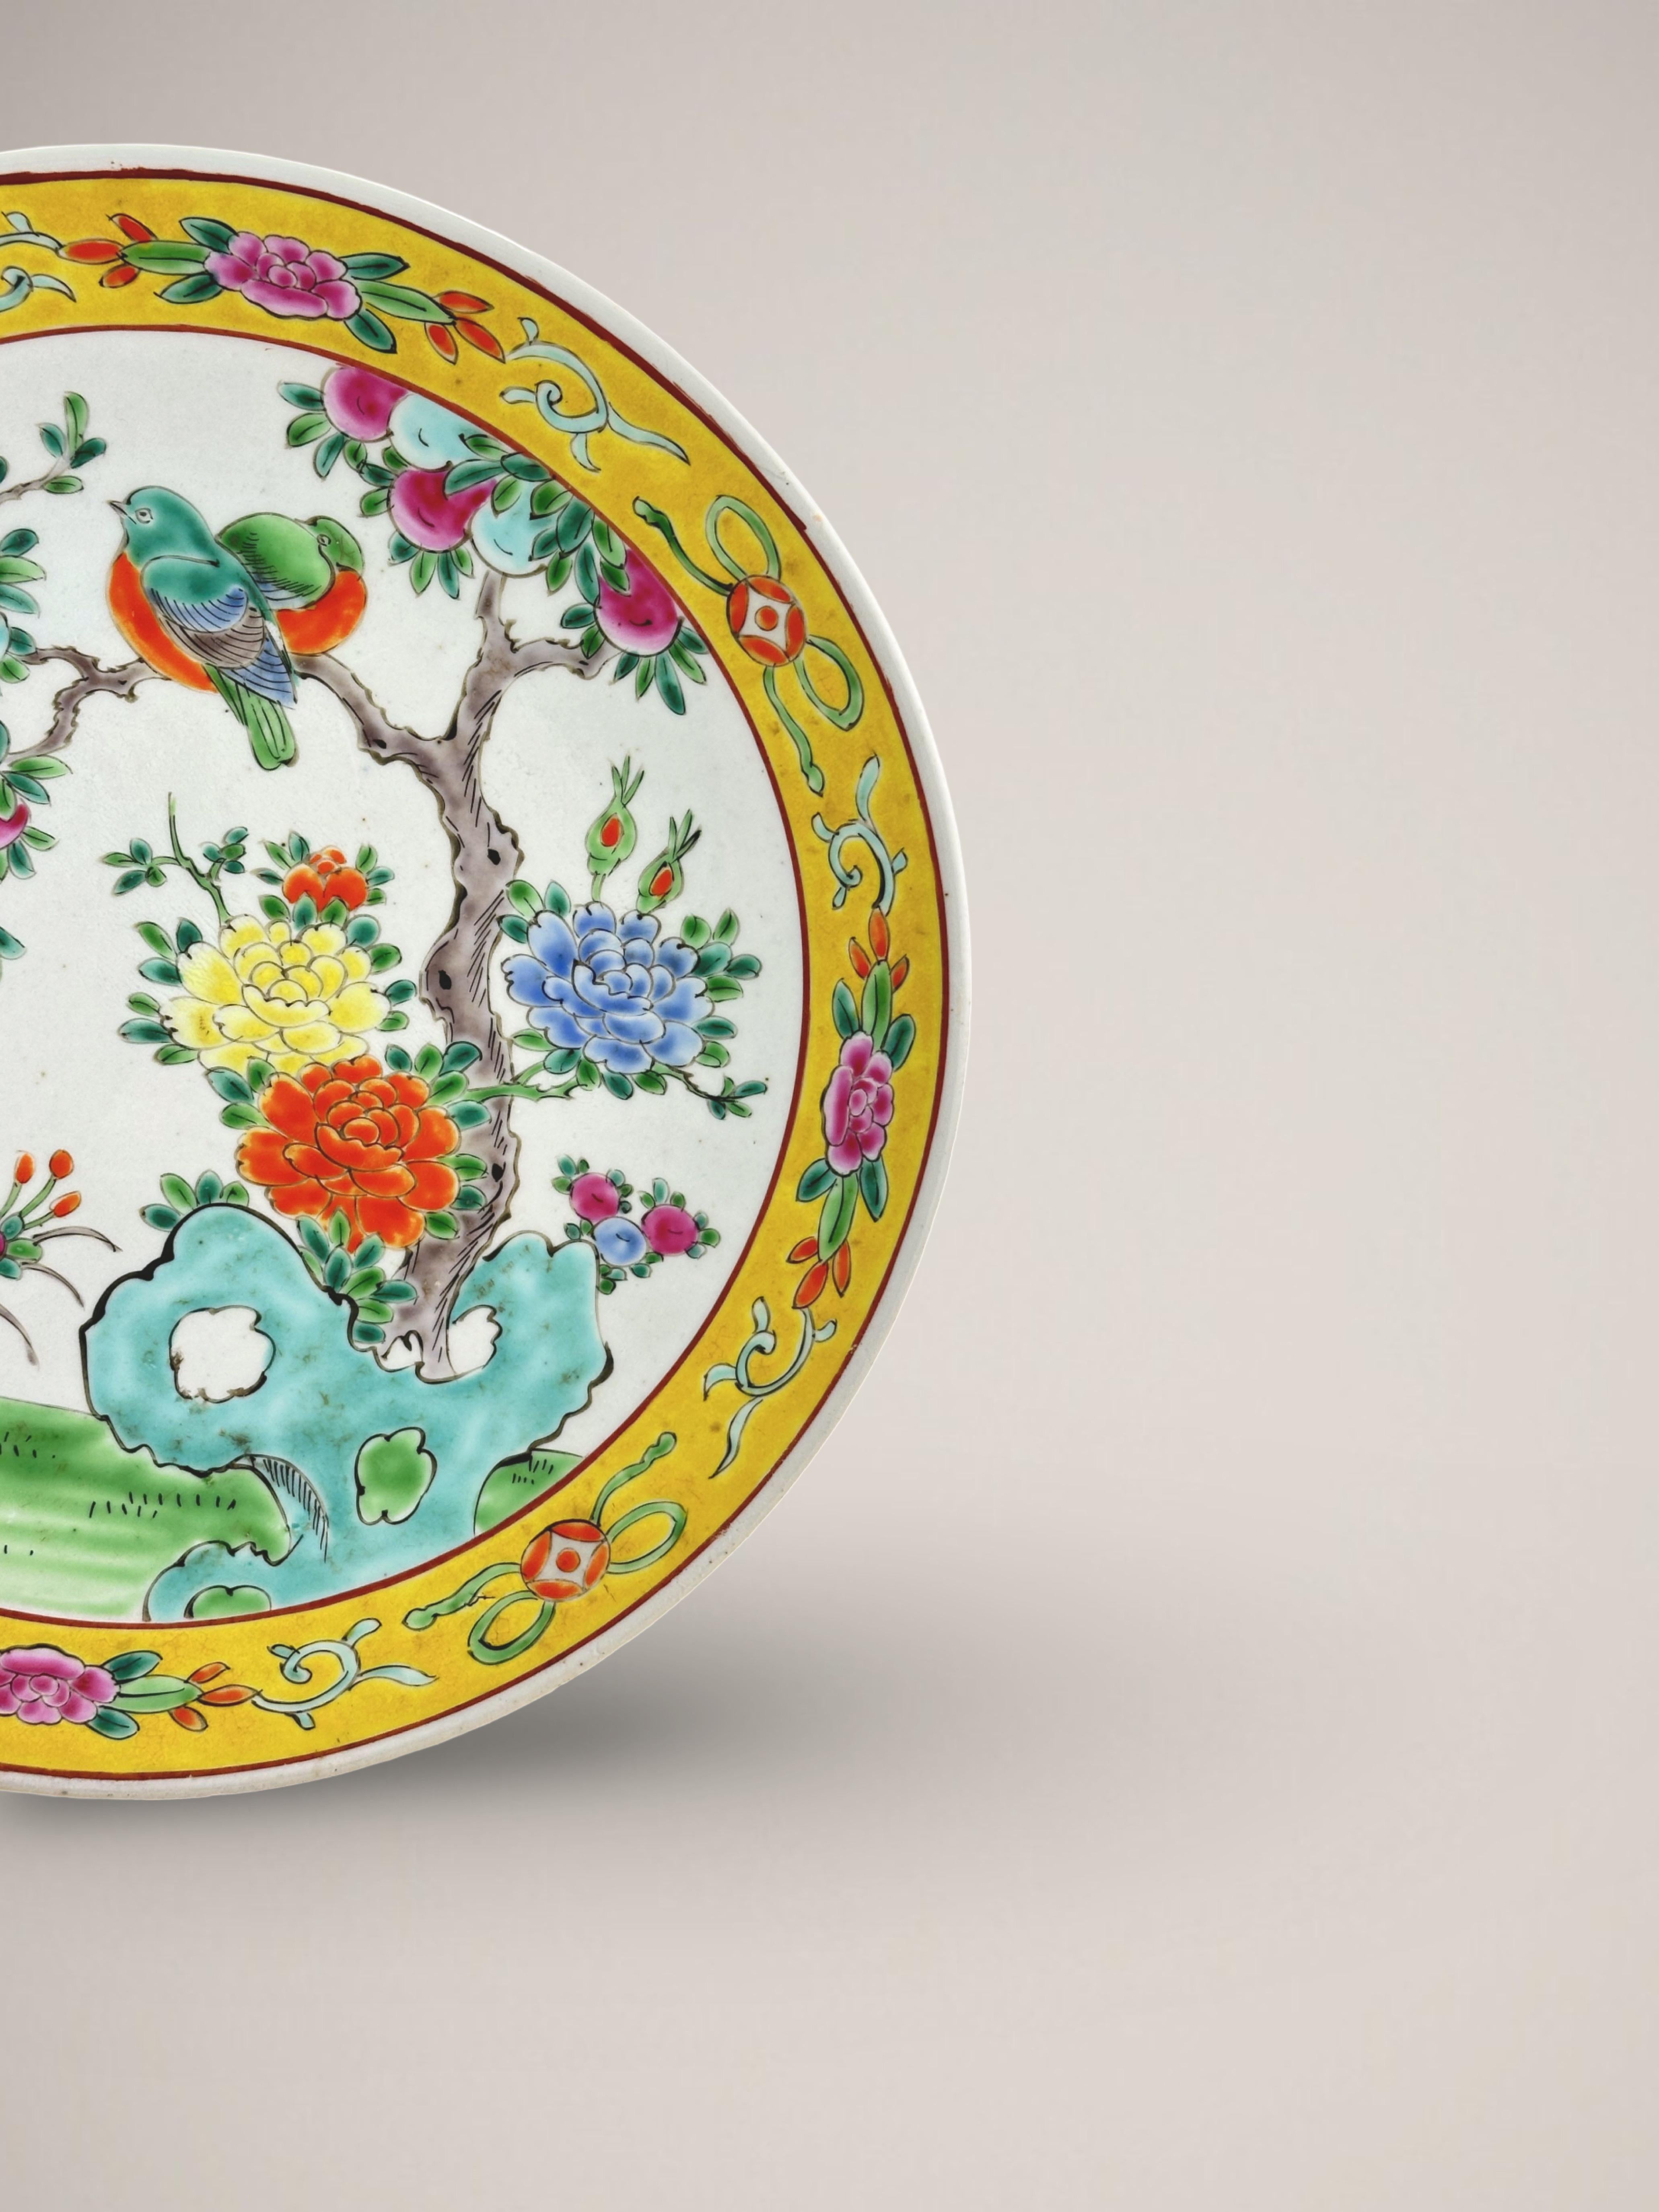 A brightly coloured Famille Jaune porcelain charger plate. Handcrafted in Japan around the end of the nineteenth century, during the Meiji era.

The large decorative plate depicts a brightly coloured figural scene, conveying a sense of springtime